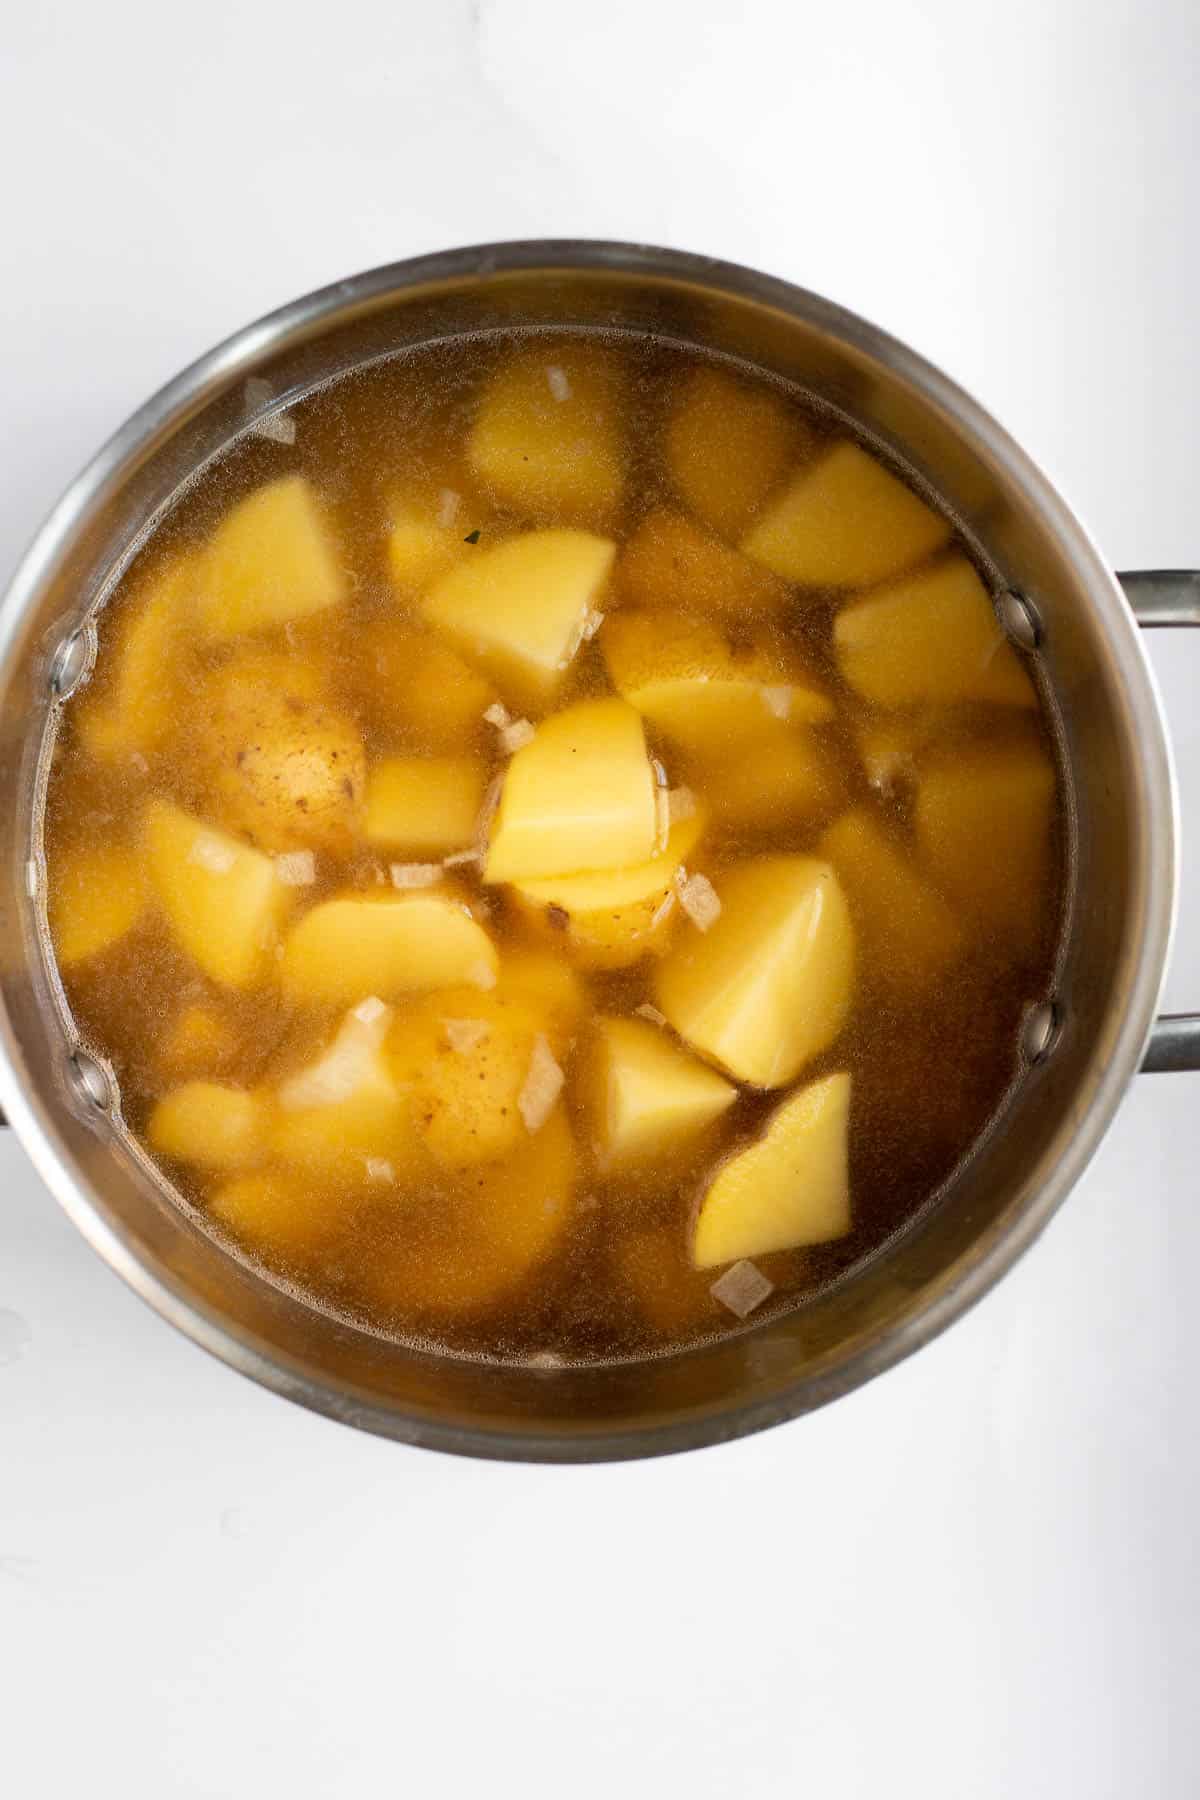 potatoes and broth in a silver pot.